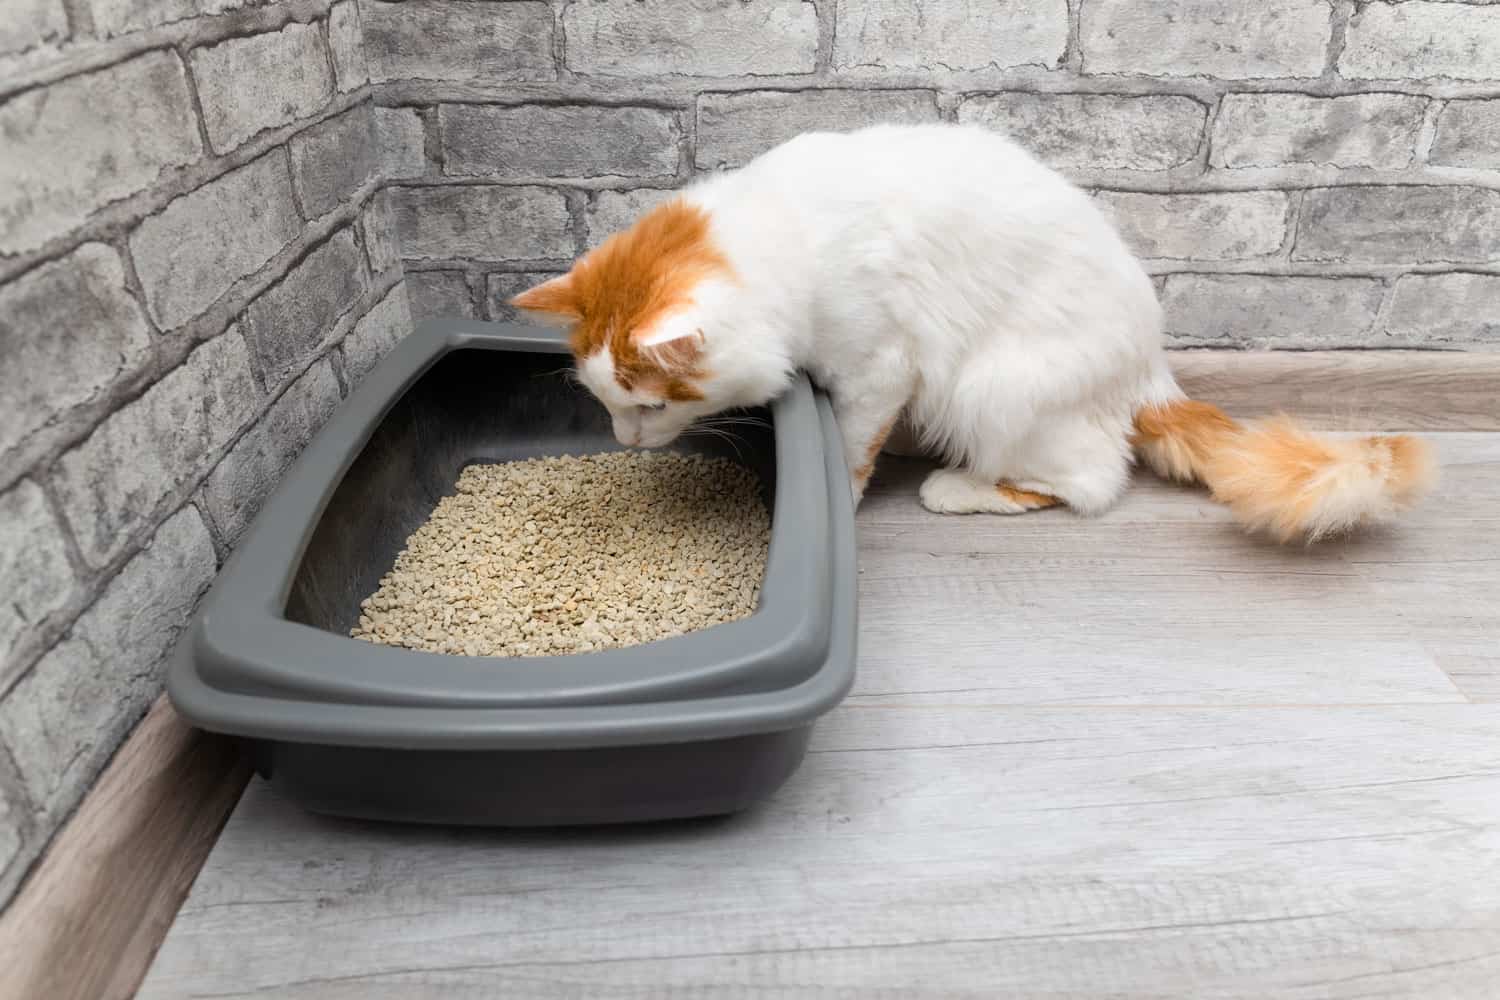 White cat checking the litter box, Why Does My Cat Attack Me When I Clean The Litter Box?